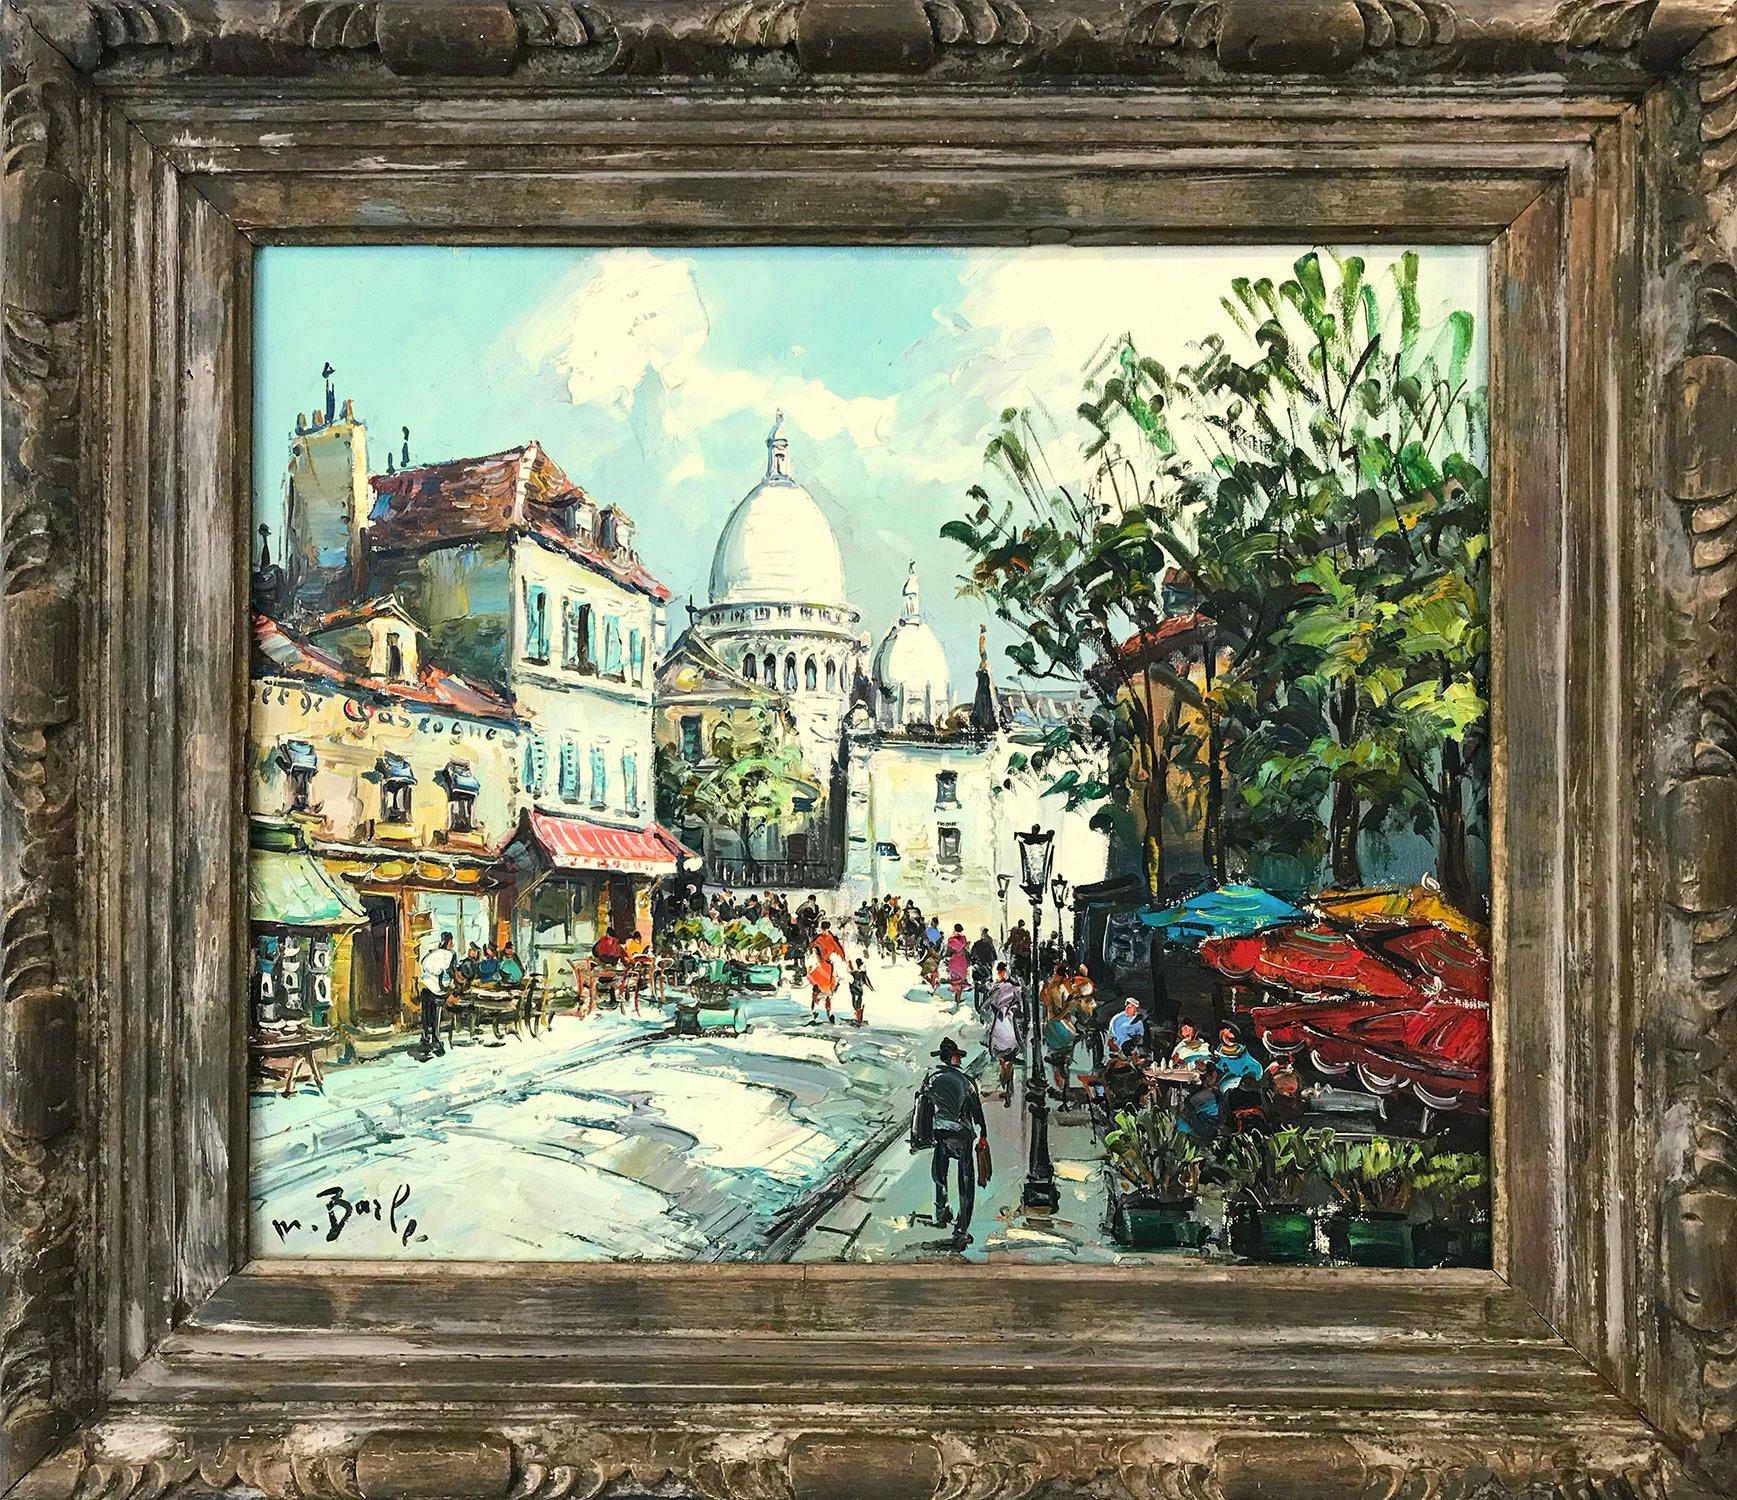 Maurice Barle Figurative Painting - "Place Du Tertre" Post-Impressionism Oil Painting with Figures and Restaurants